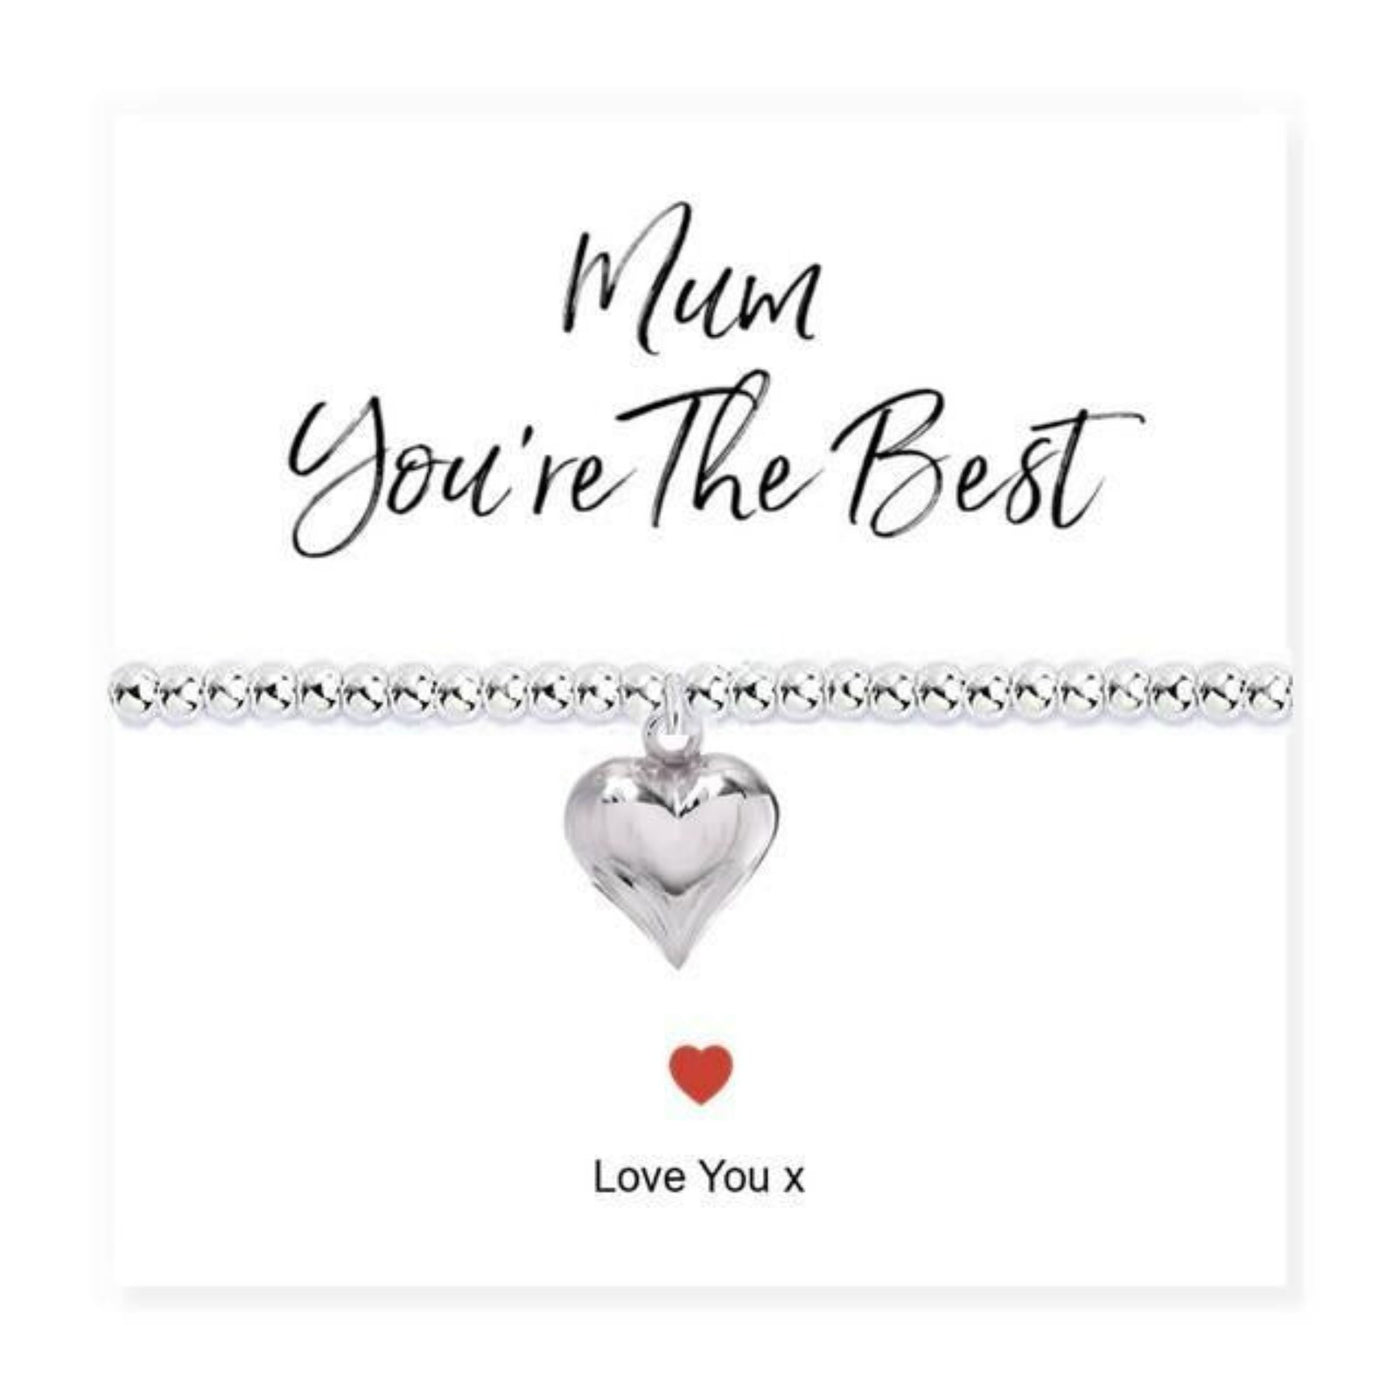 Mum You're The Best - Silver Plated Stretch Beaded Bracelet And Message Card.